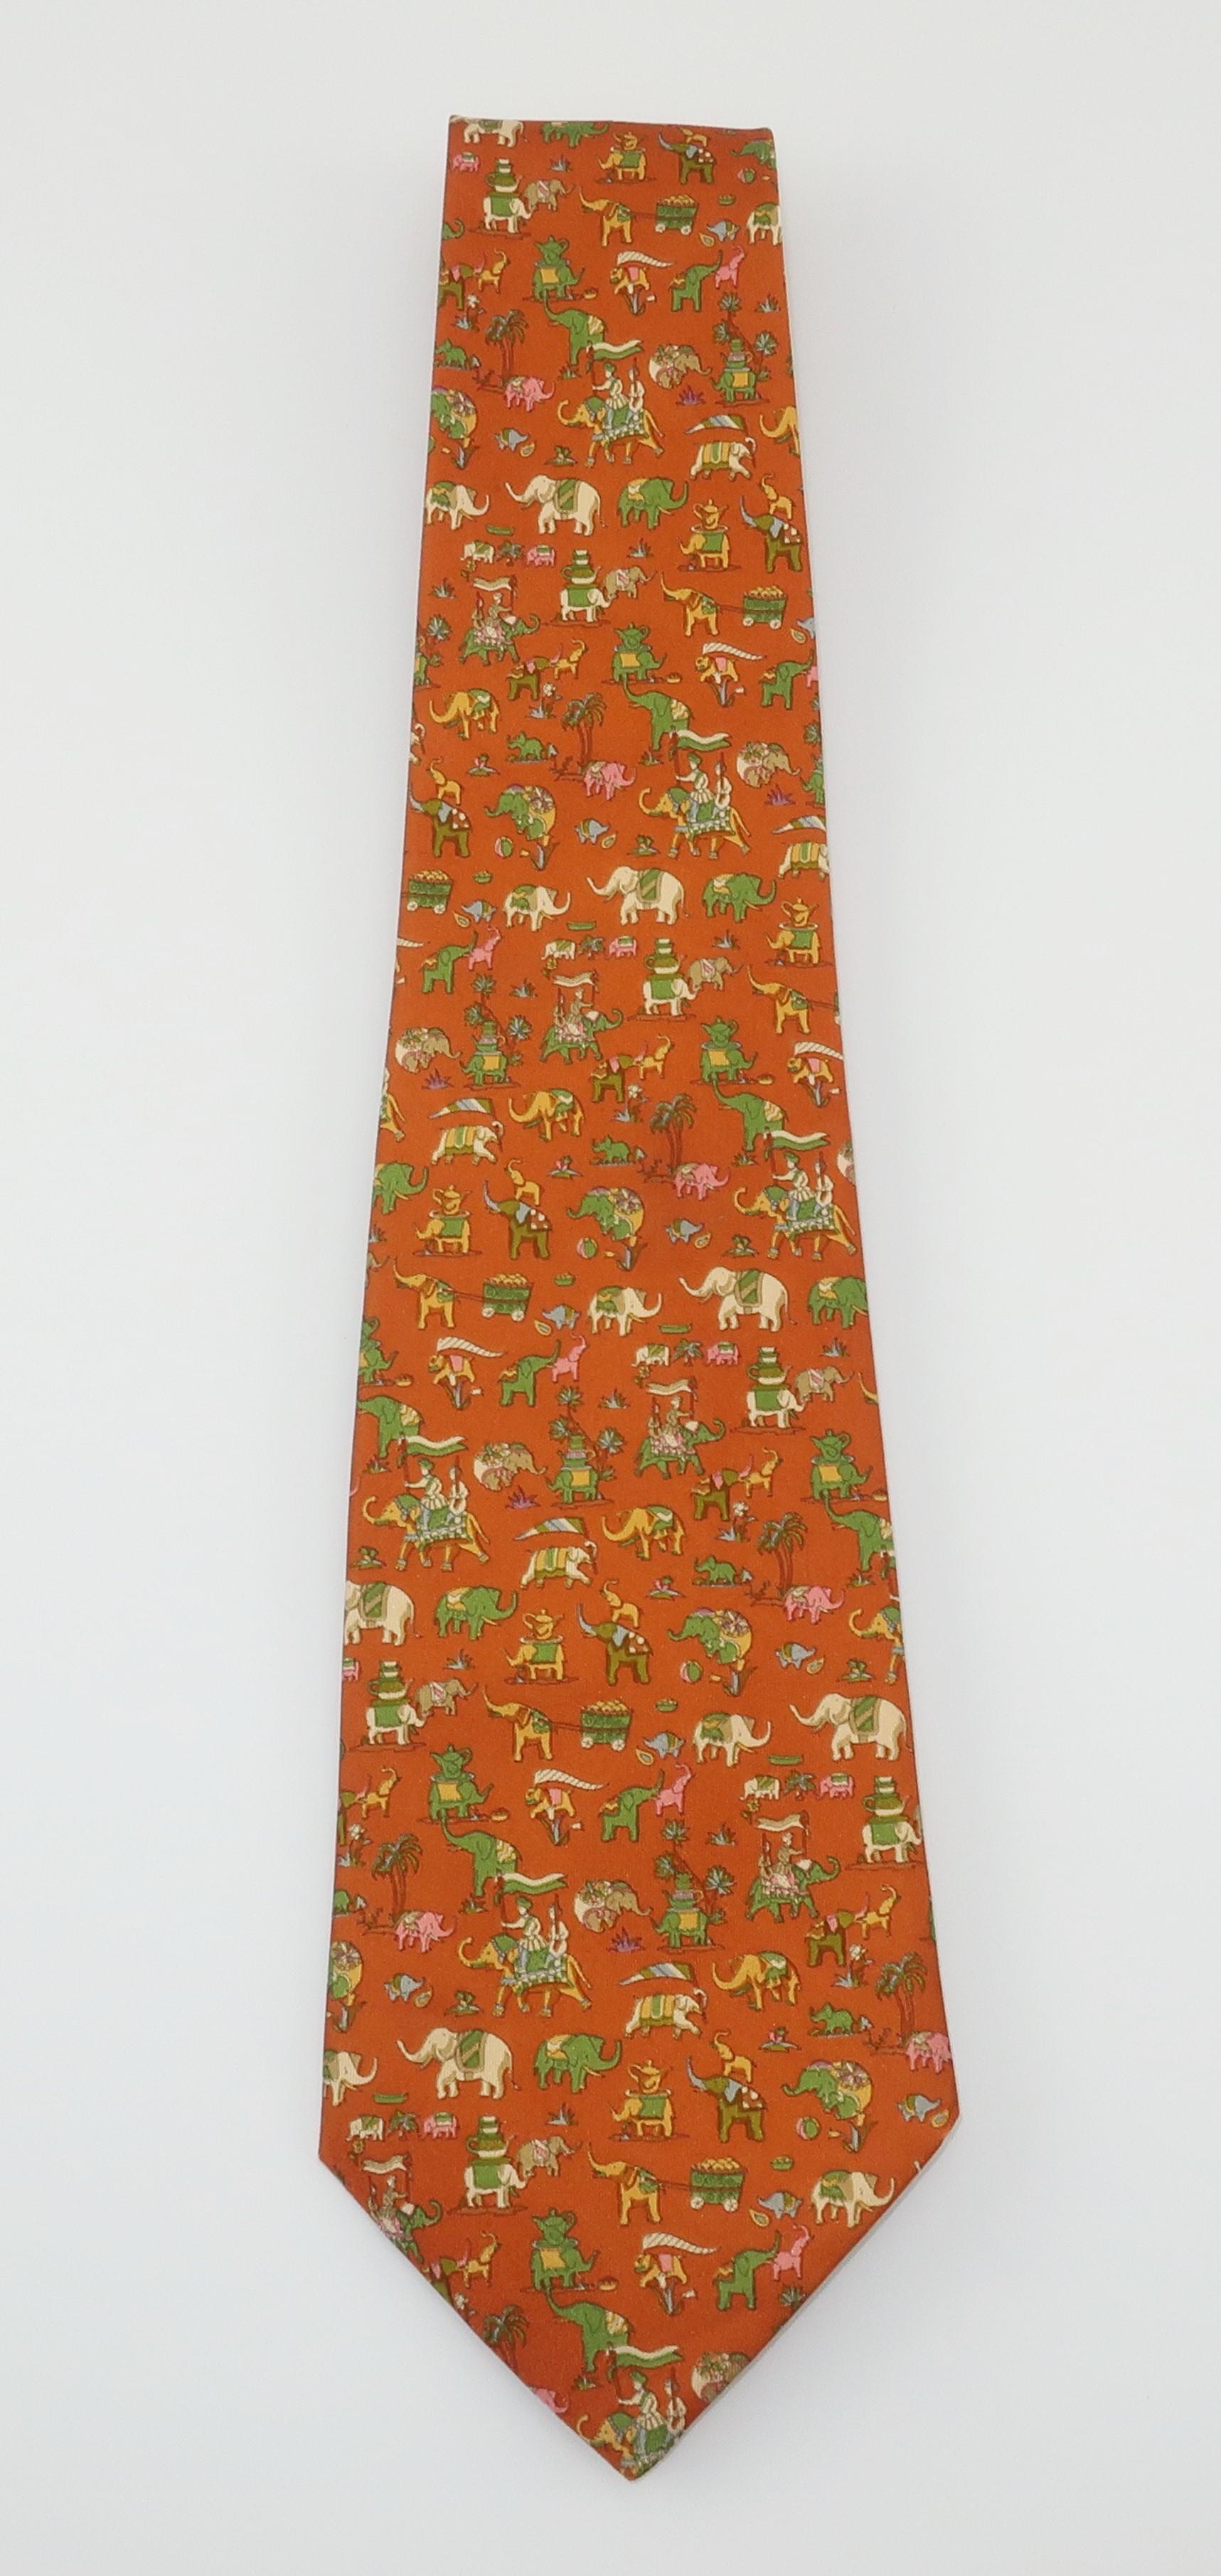 Ferragamo creates a menswear silk necktie with a whimsical Raj motif depicting festooned elephants in shades of green, yellow, pink and antique white all on a pumpkin color background. Beautifully made with the quality one would expect from